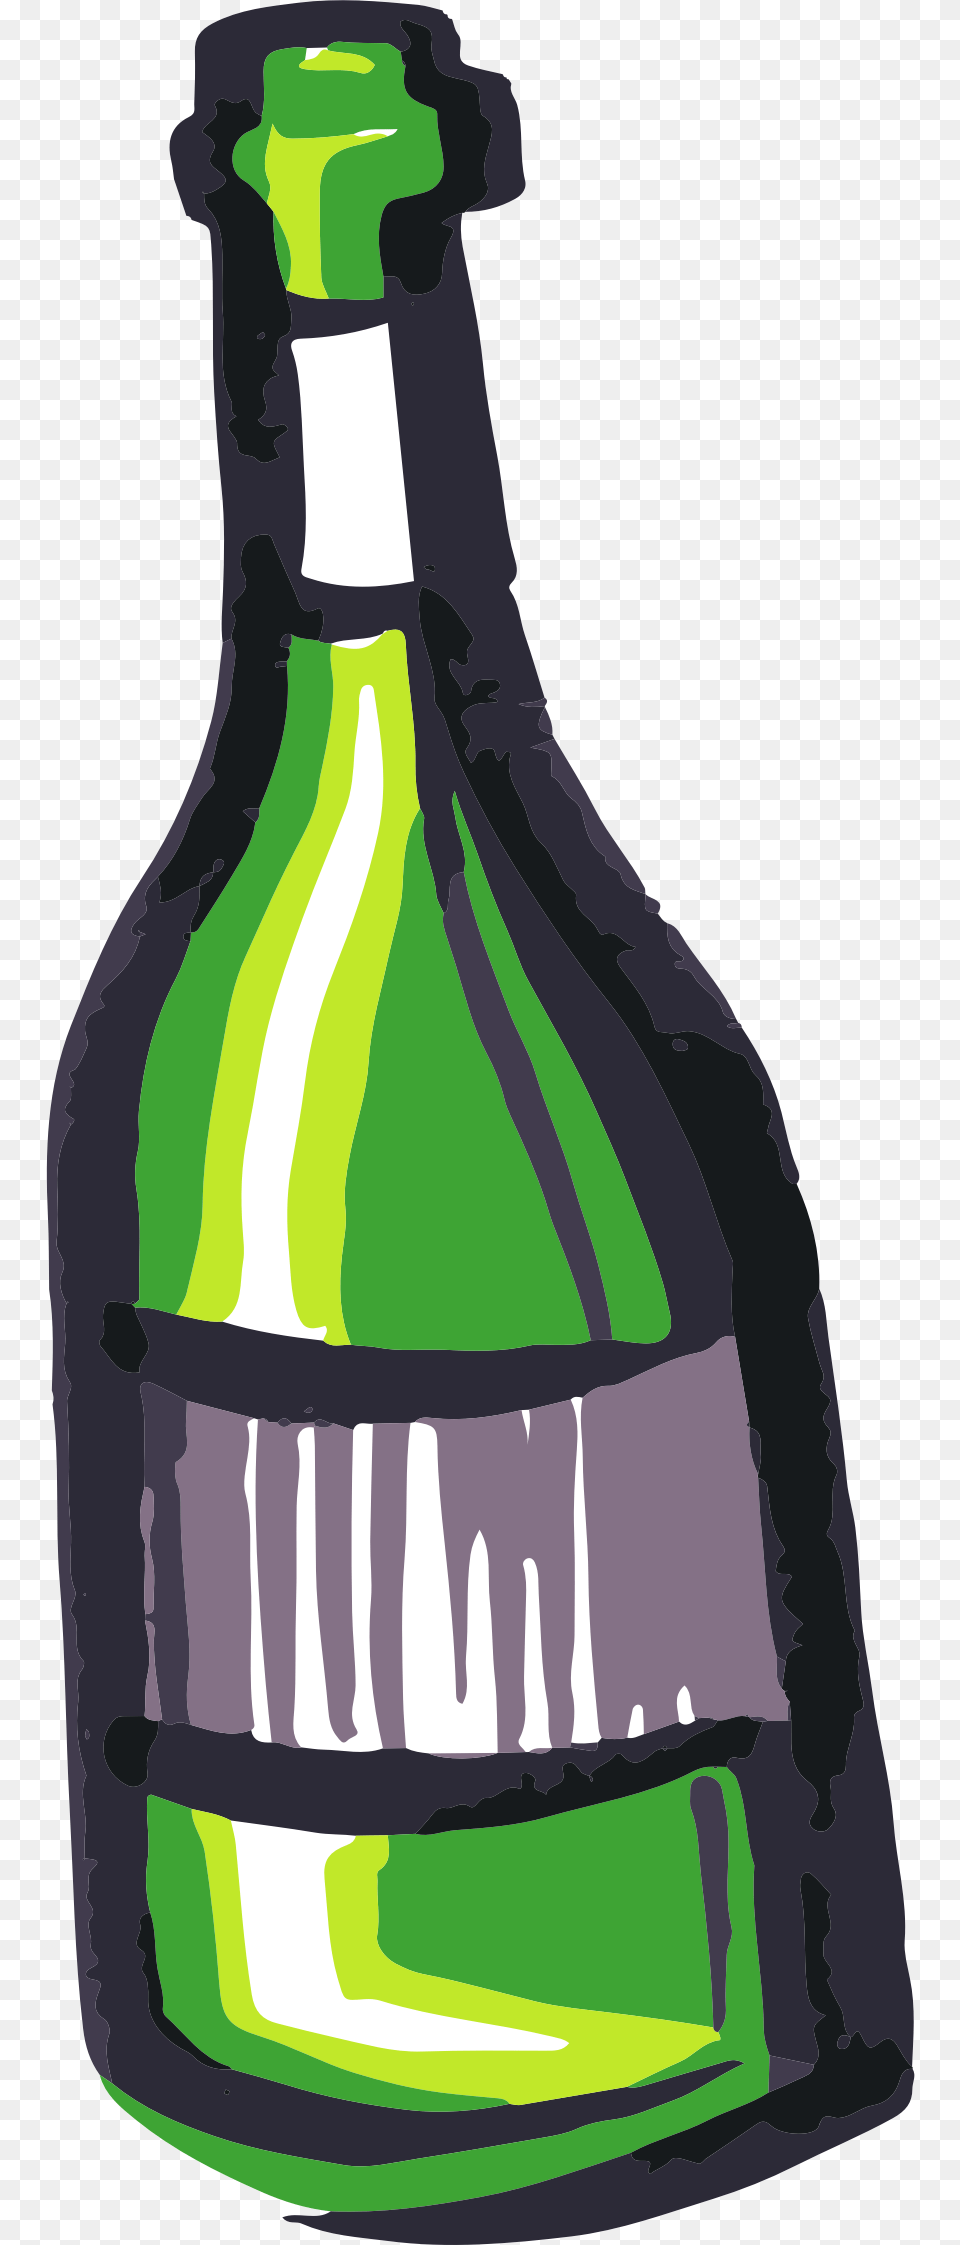 This Icons Design Of Raseone Wine Bottle, Alcohol, Beer, Beverage, Beer Bottle Free Png